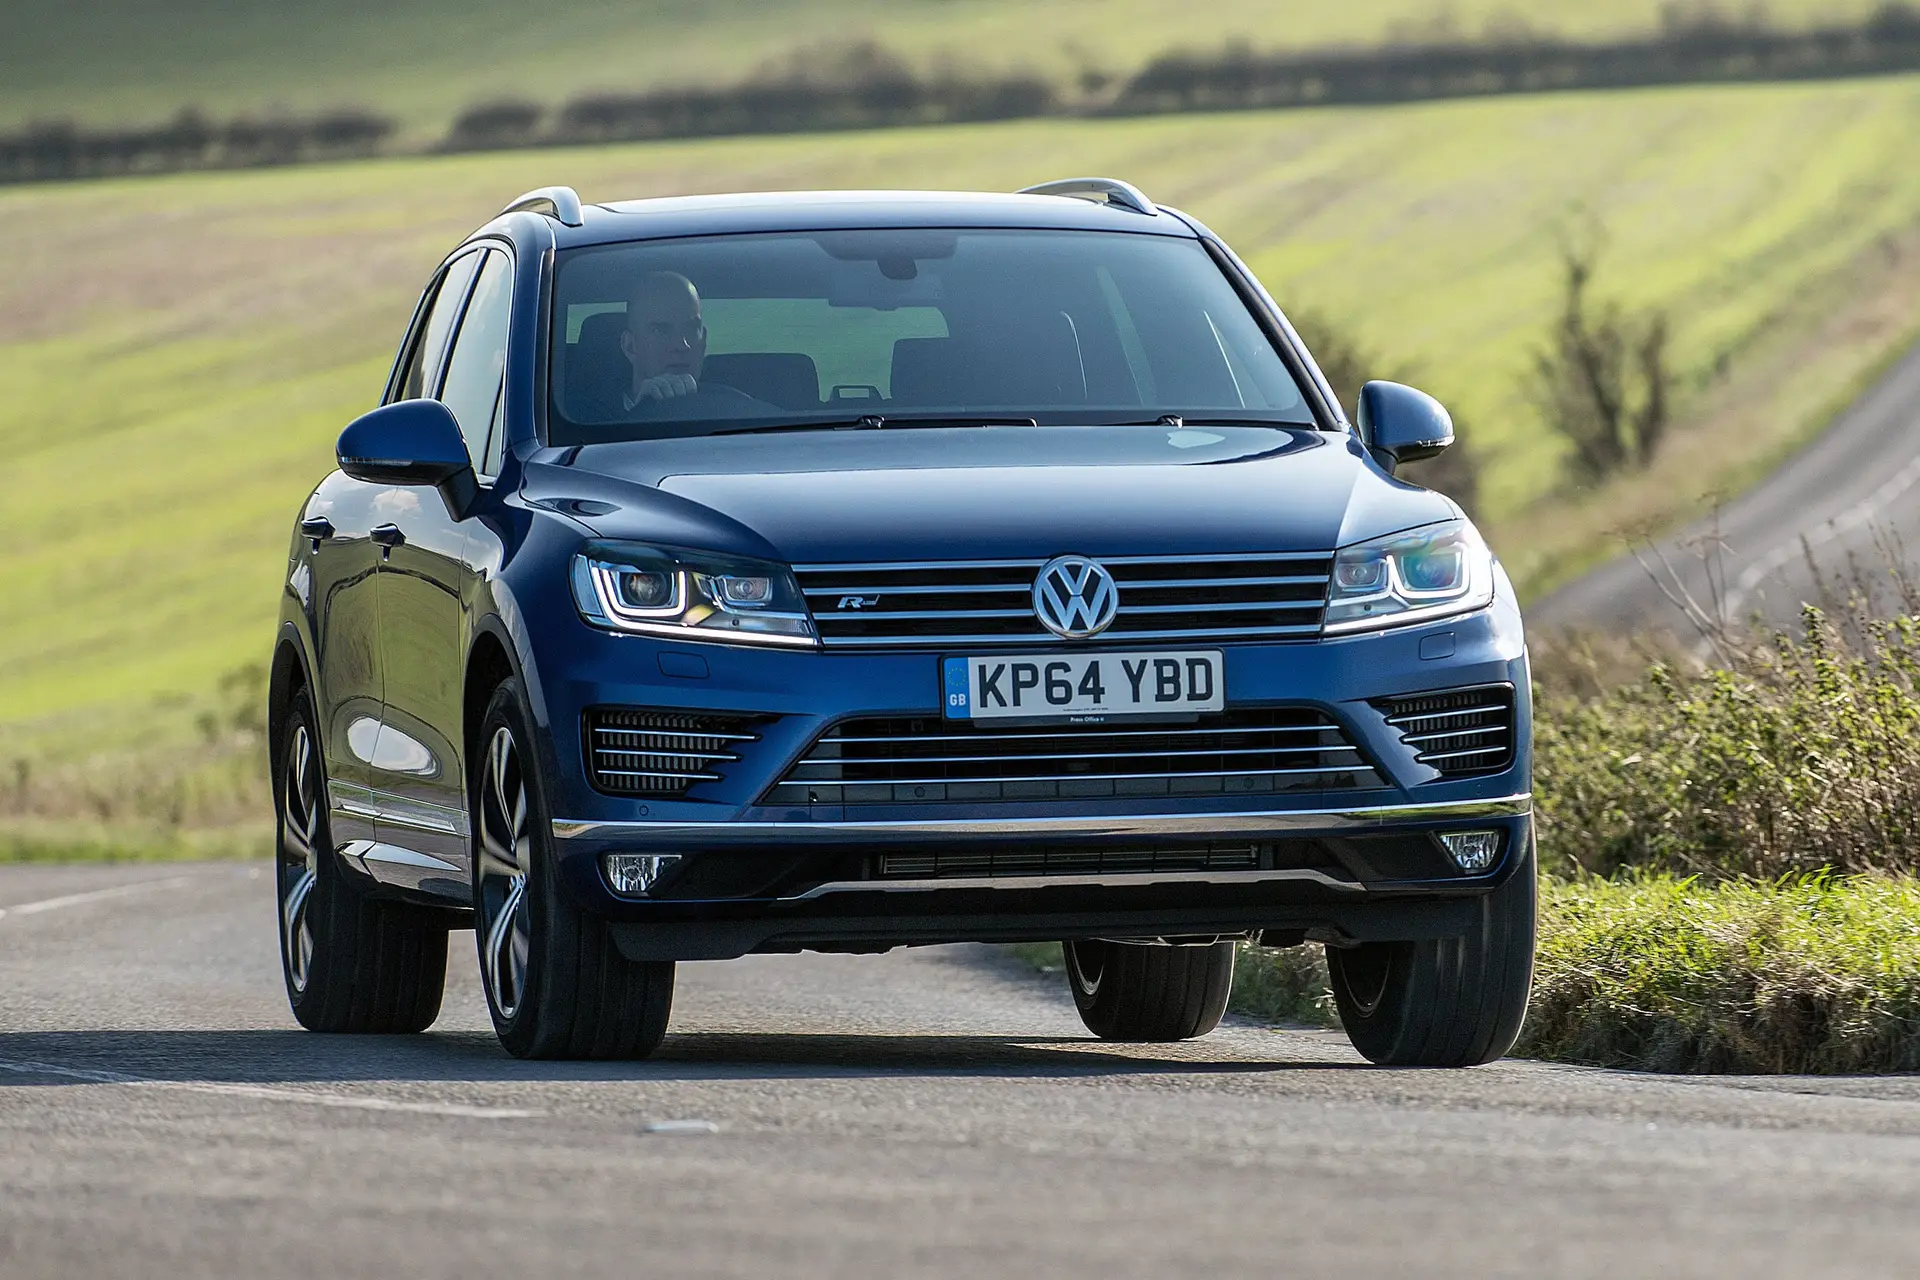  Volkswagen Touareg (2010-2018) Review: exterior front three quarter photo of the Volkswagen Touareg on the road